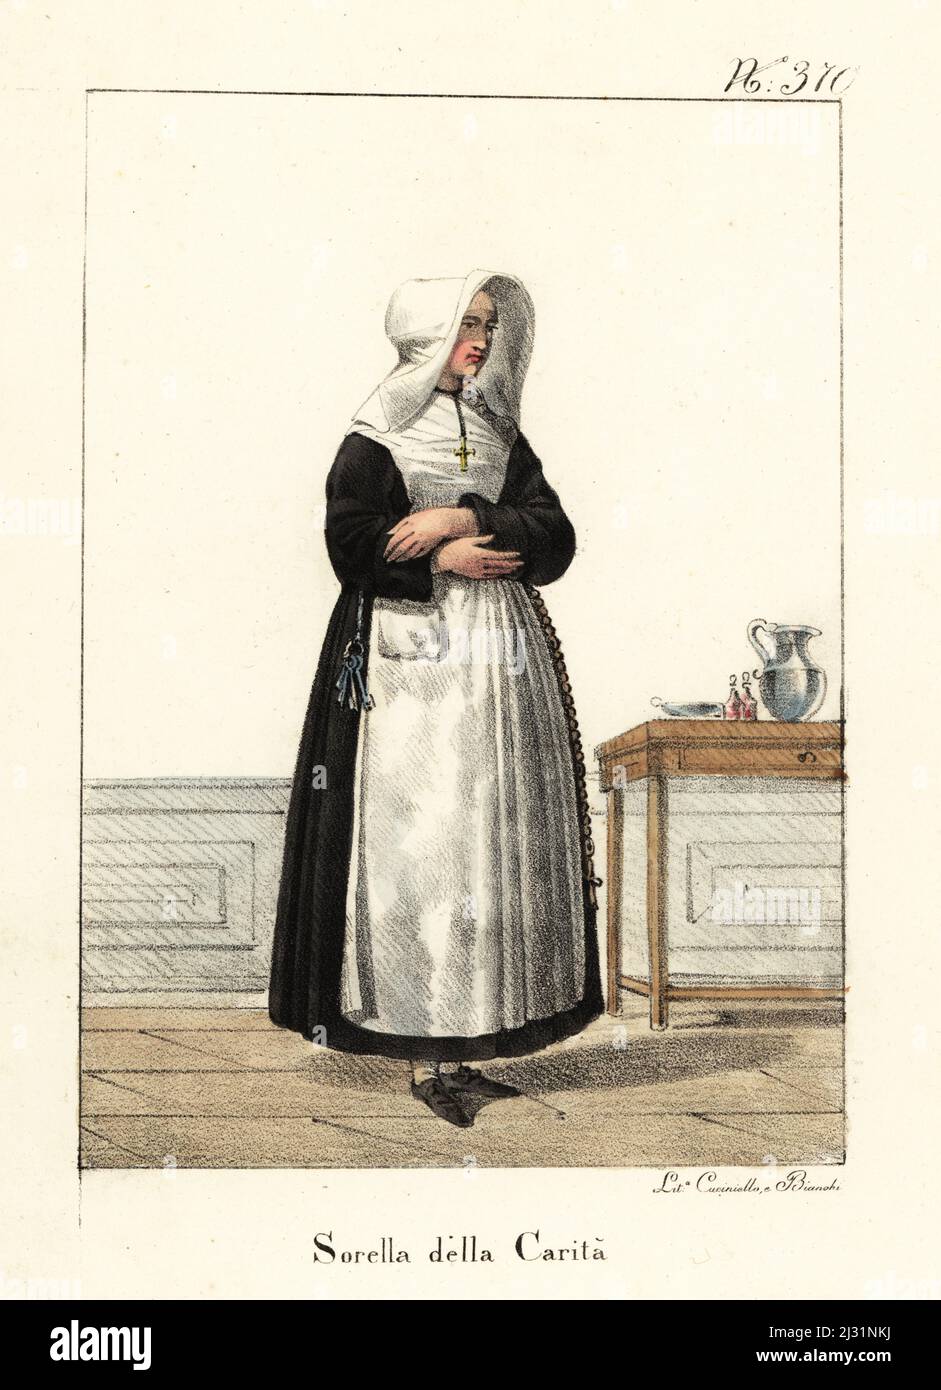 Nun in the robes of the Sisters of Charity, Bourbon Restoration, France. In wimple, black habit, white apron with crucifix and keys. Soeur de la Charite. Handcoloured lithograph by Lorenzo Bianchi and Domenico Cuciniello after Hippolyte Lecomte from Costumi civili e militari della monarchia francese dal 1200 al 1820, Naples, 1825. Italian edition of Lecomte’s Civilian and military costumes of the French monarchy from 1200 to 1820. Stock Photo